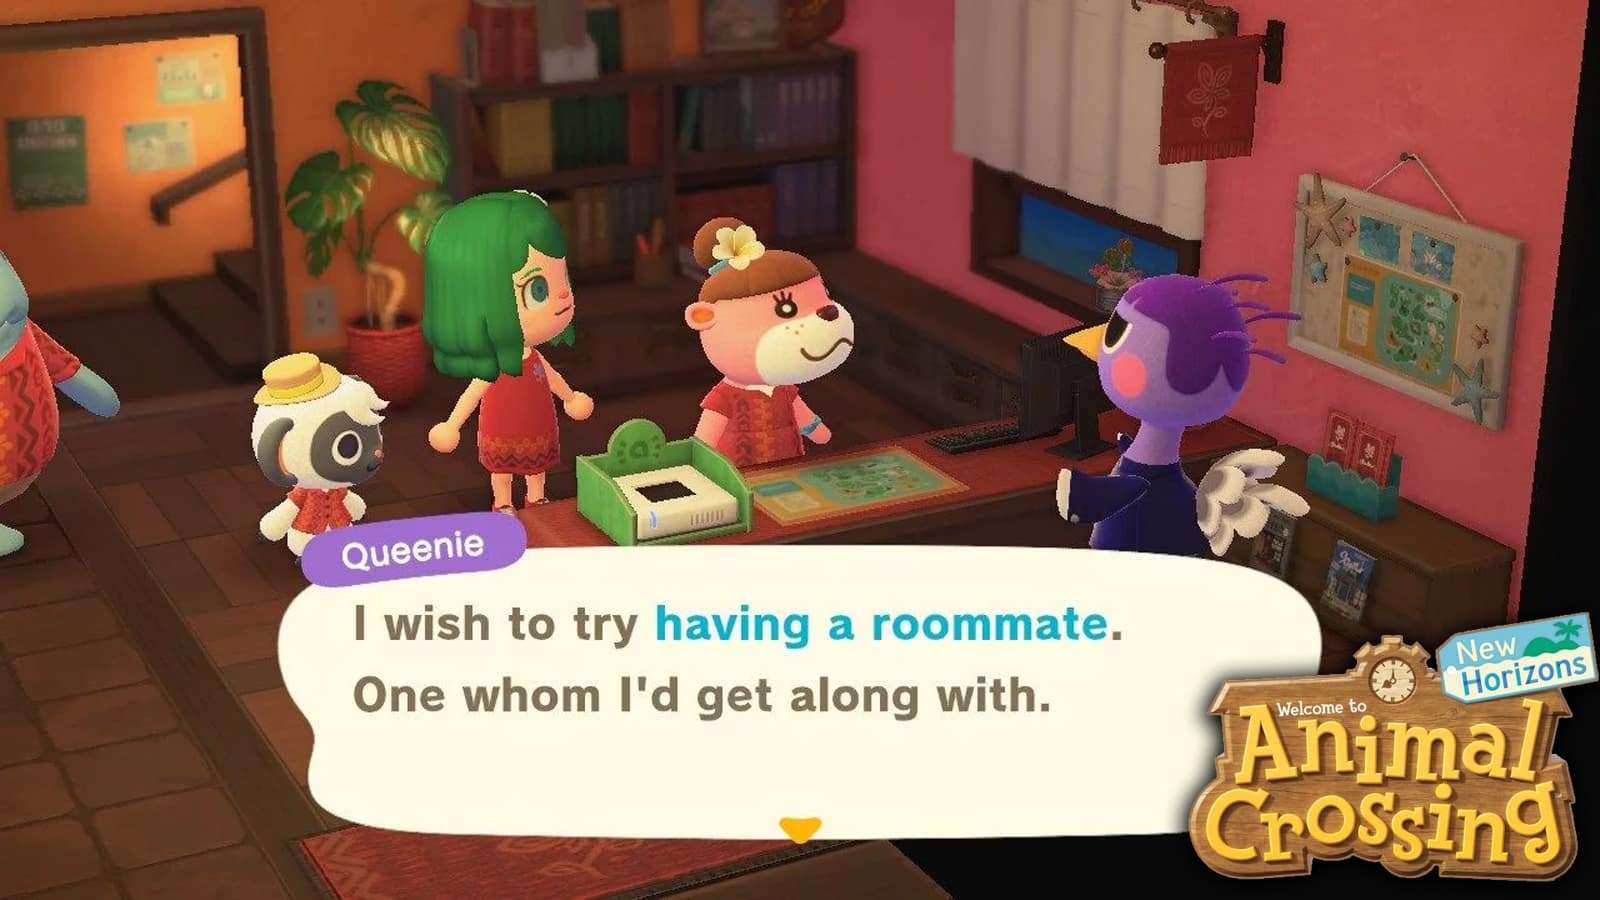 Animal Crossing: New Horizons creators hope game can be 'an escape